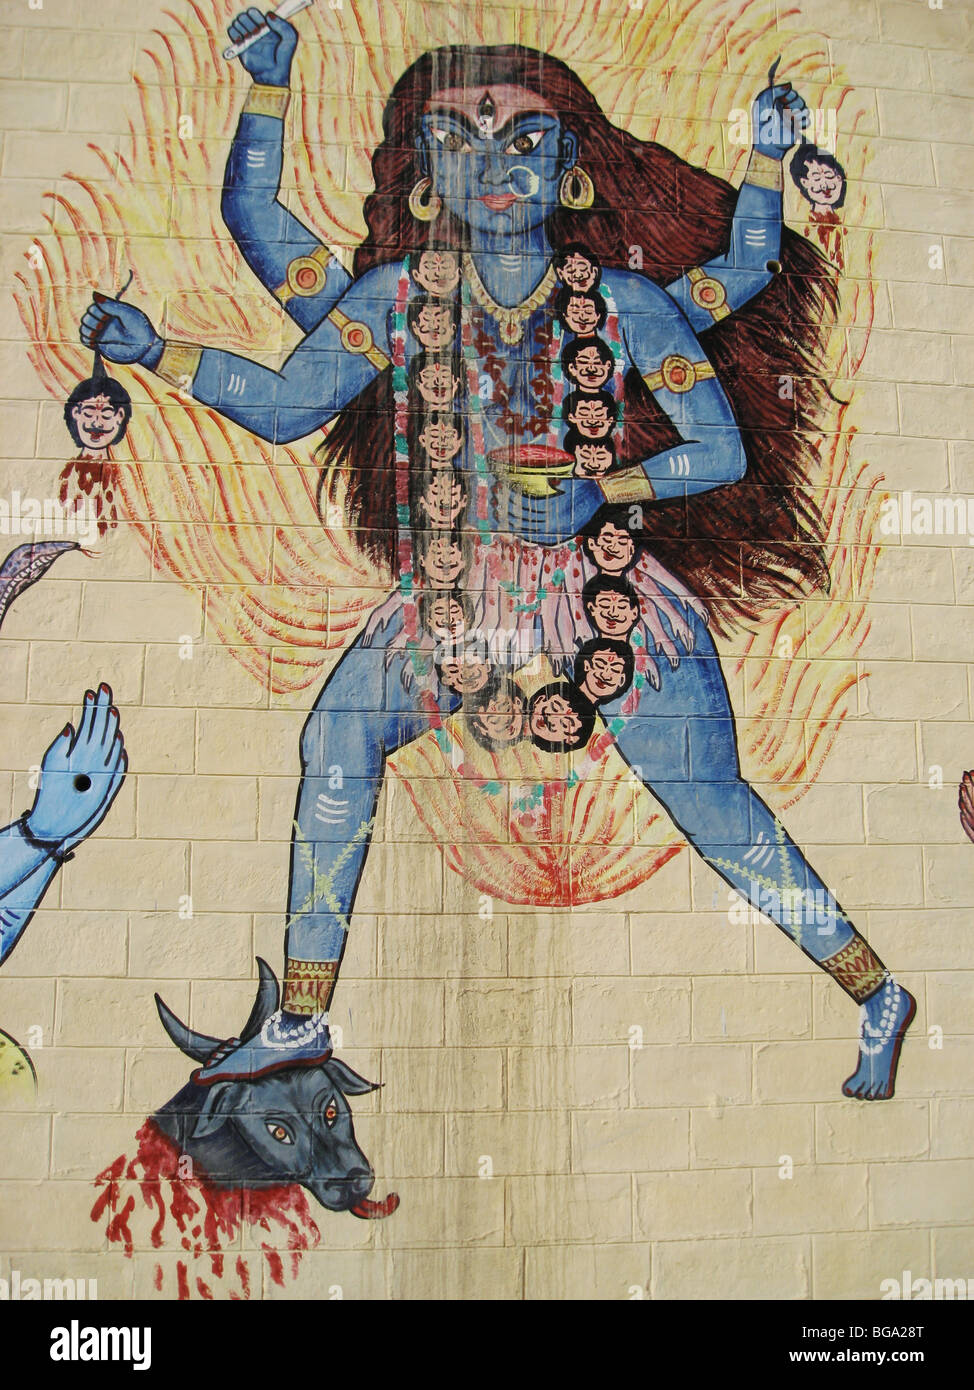 Picture of Lord Shiva on a wall in Puri, Orissa, India. Stock Photo